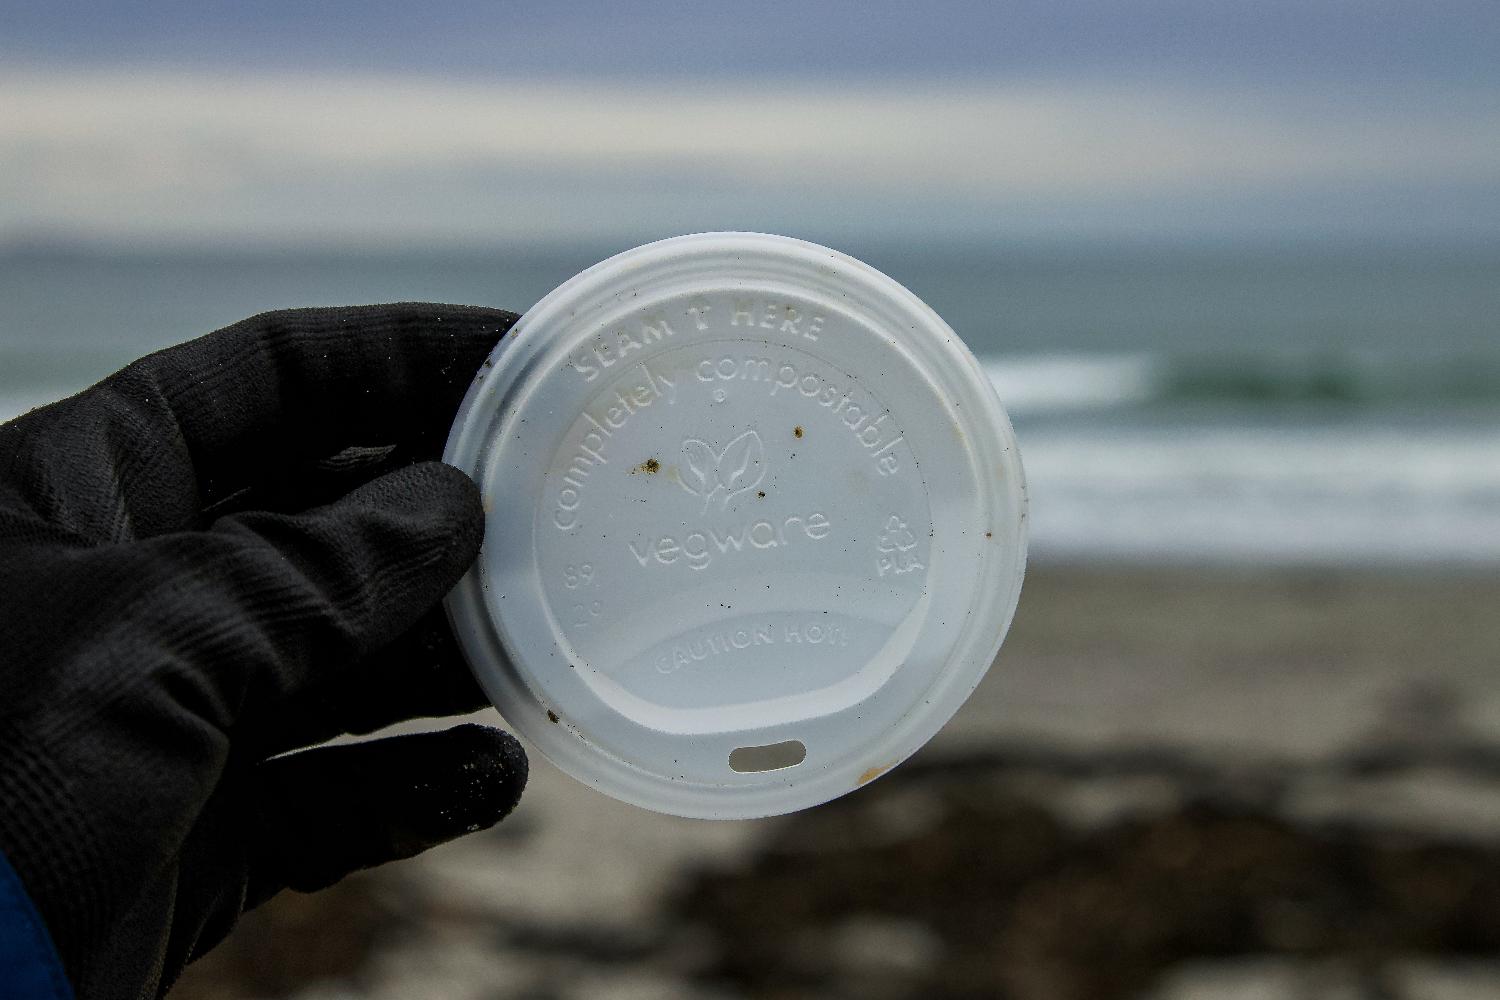 A photo of a compostable coffee cup lid that was found on a beach cleanup - greenwashing claims